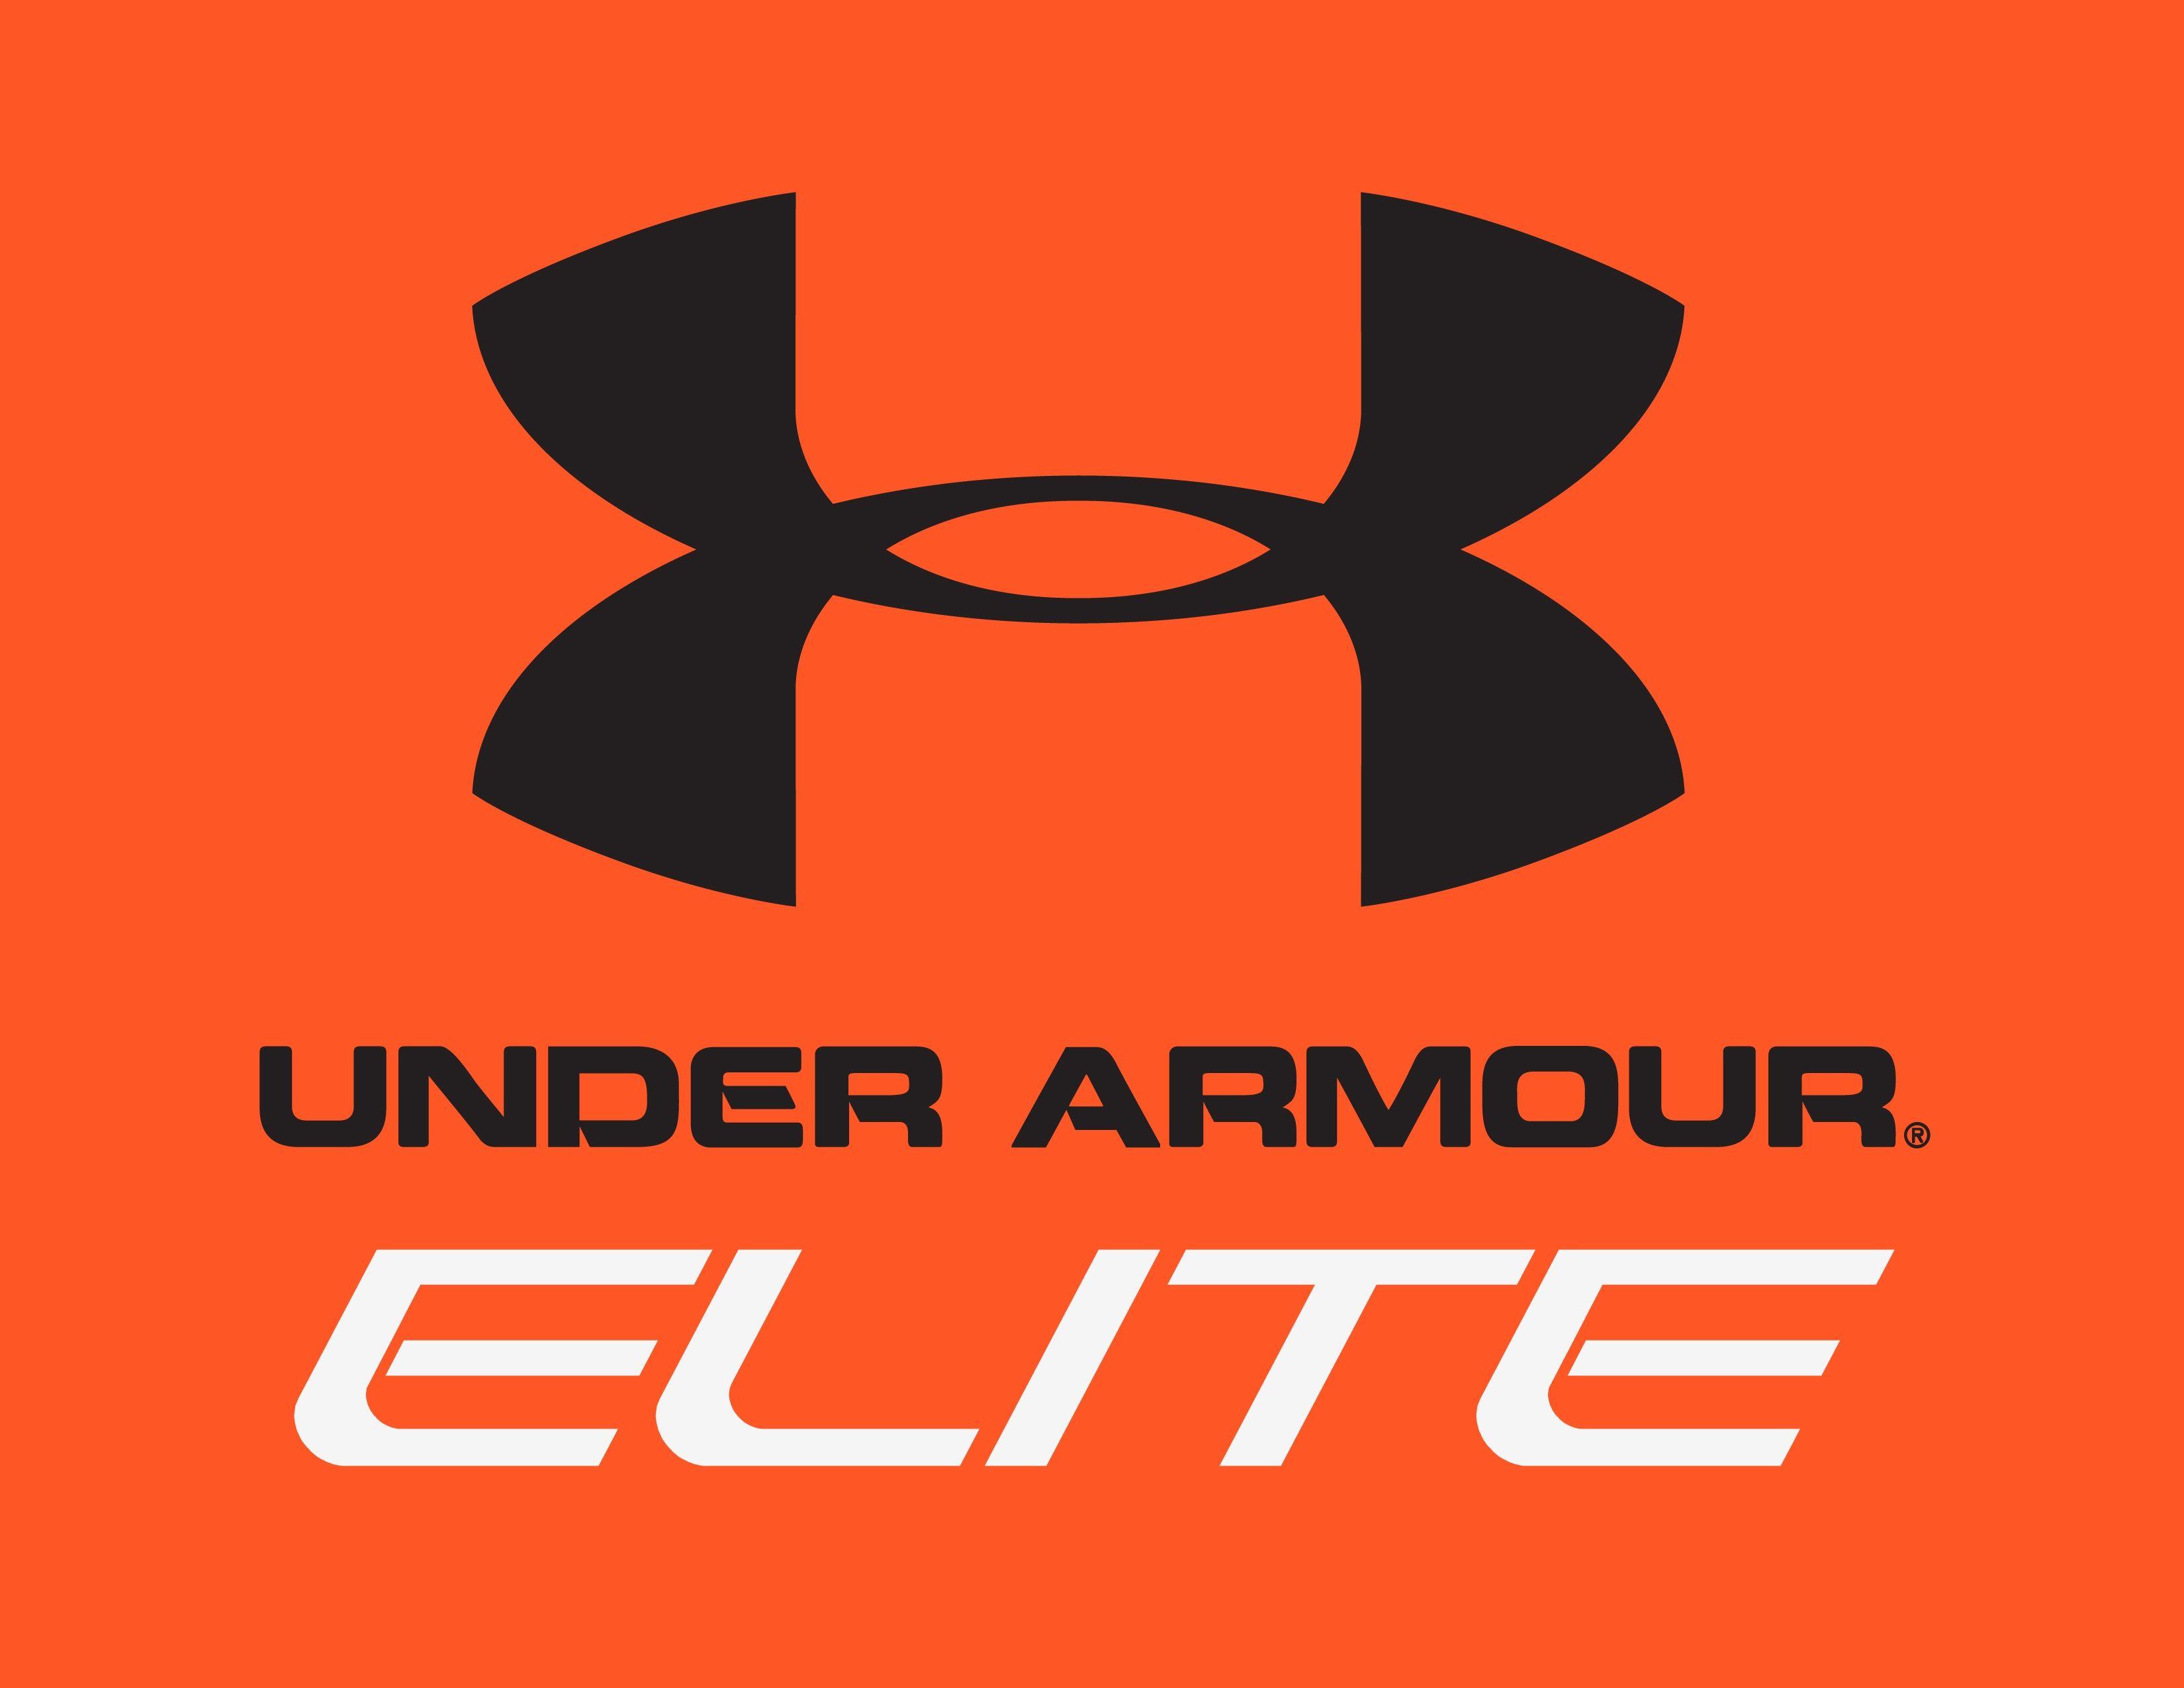 Awesome  Under armour wallpaper, Iphone wallpaper logo, Under